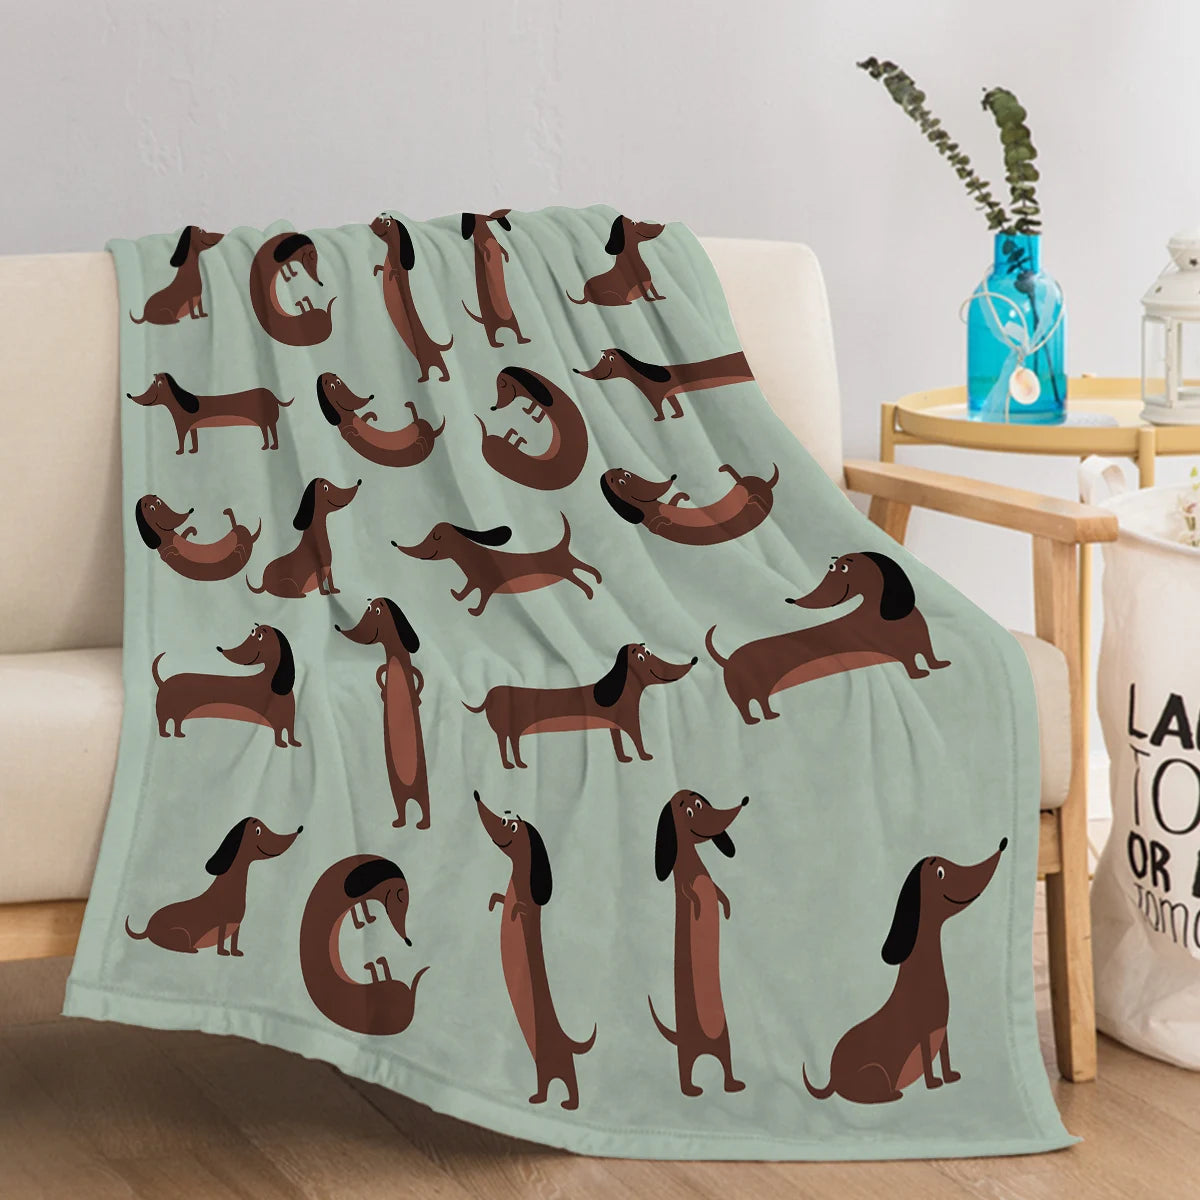 The Dachshund Pose Blanket Printed Throw Blanket Plush Fluffy Flannel Fleece Blanket Soft Throws for Sofa Couch and Bed